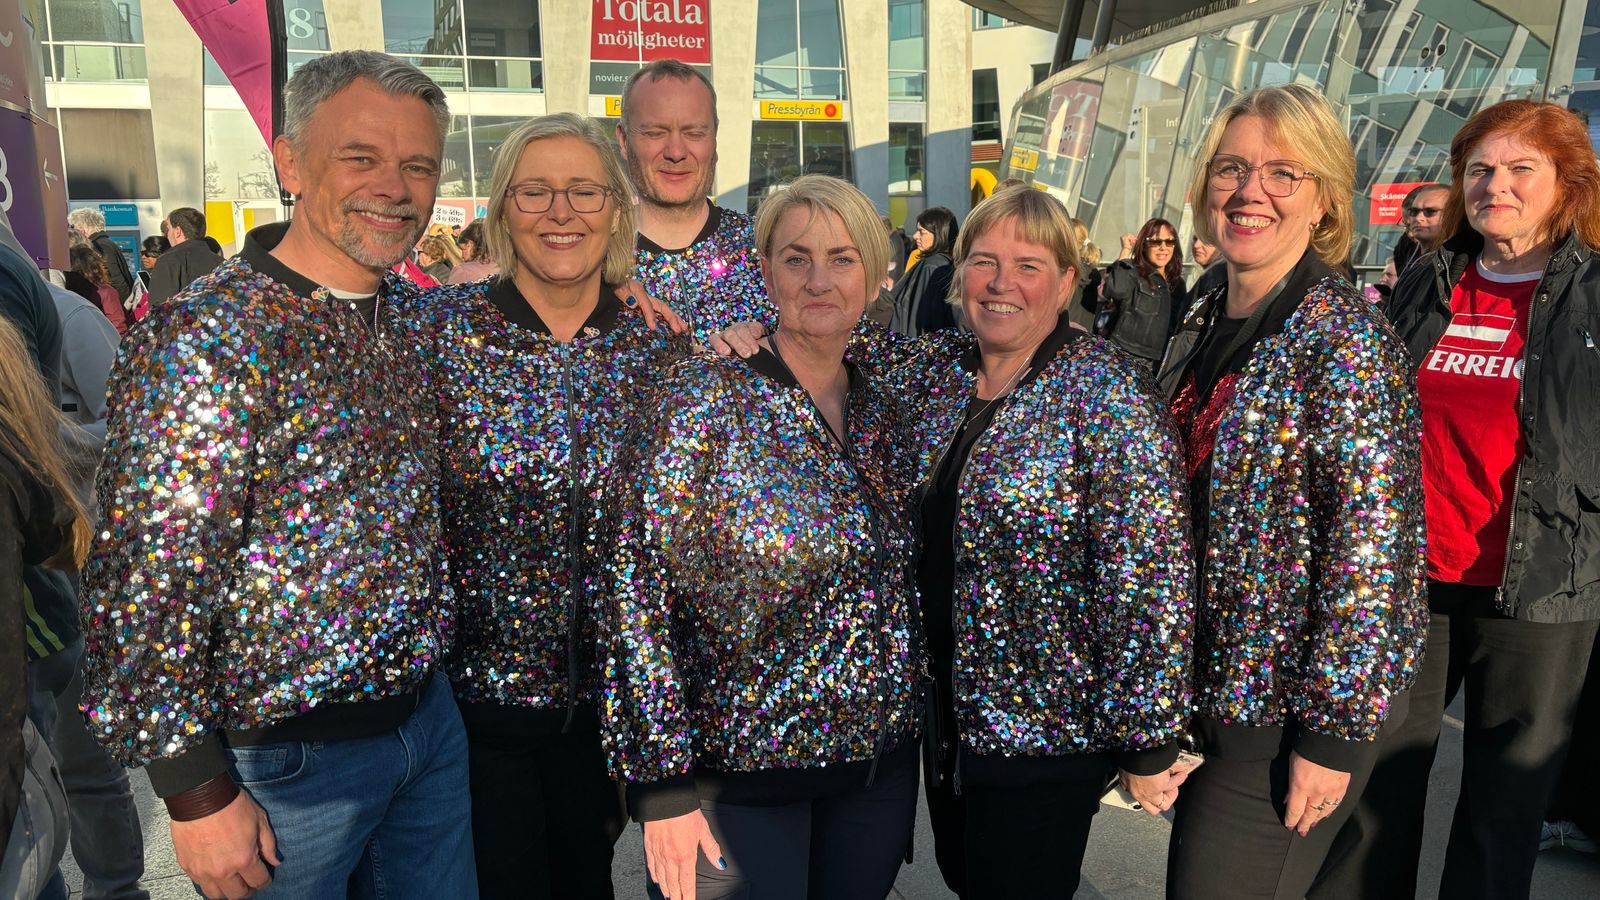 'United by sequins': Eurovision fans arrive in fabulously flamboyant outfits